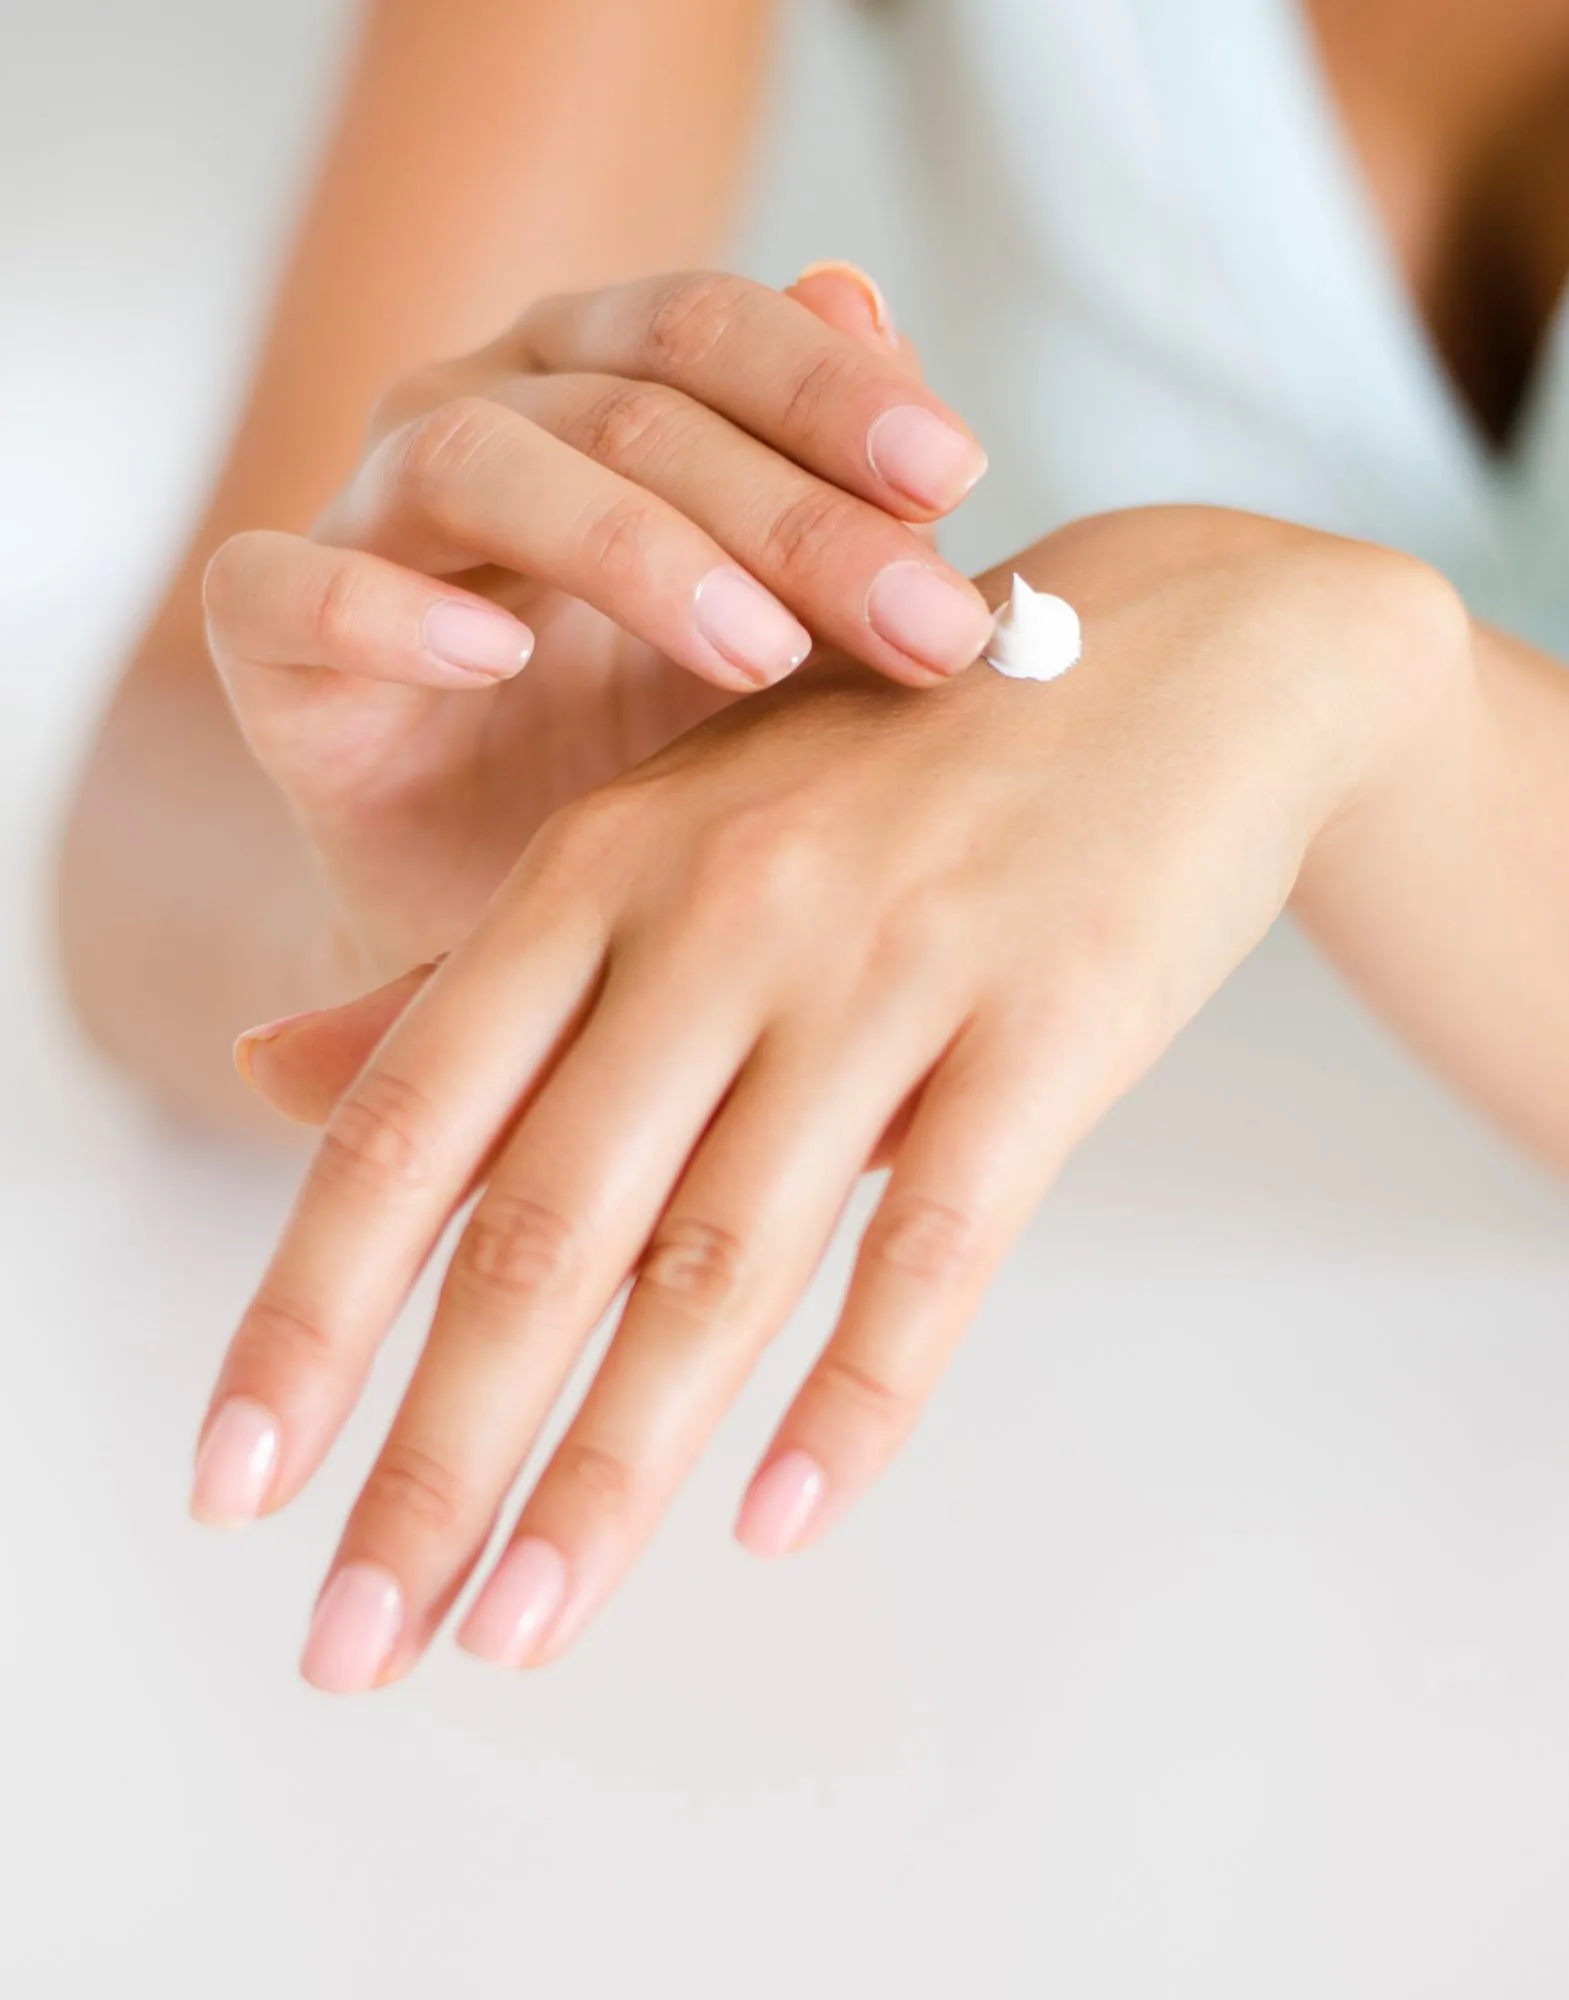 Could hand rejuvenation treatments be the choice for you?